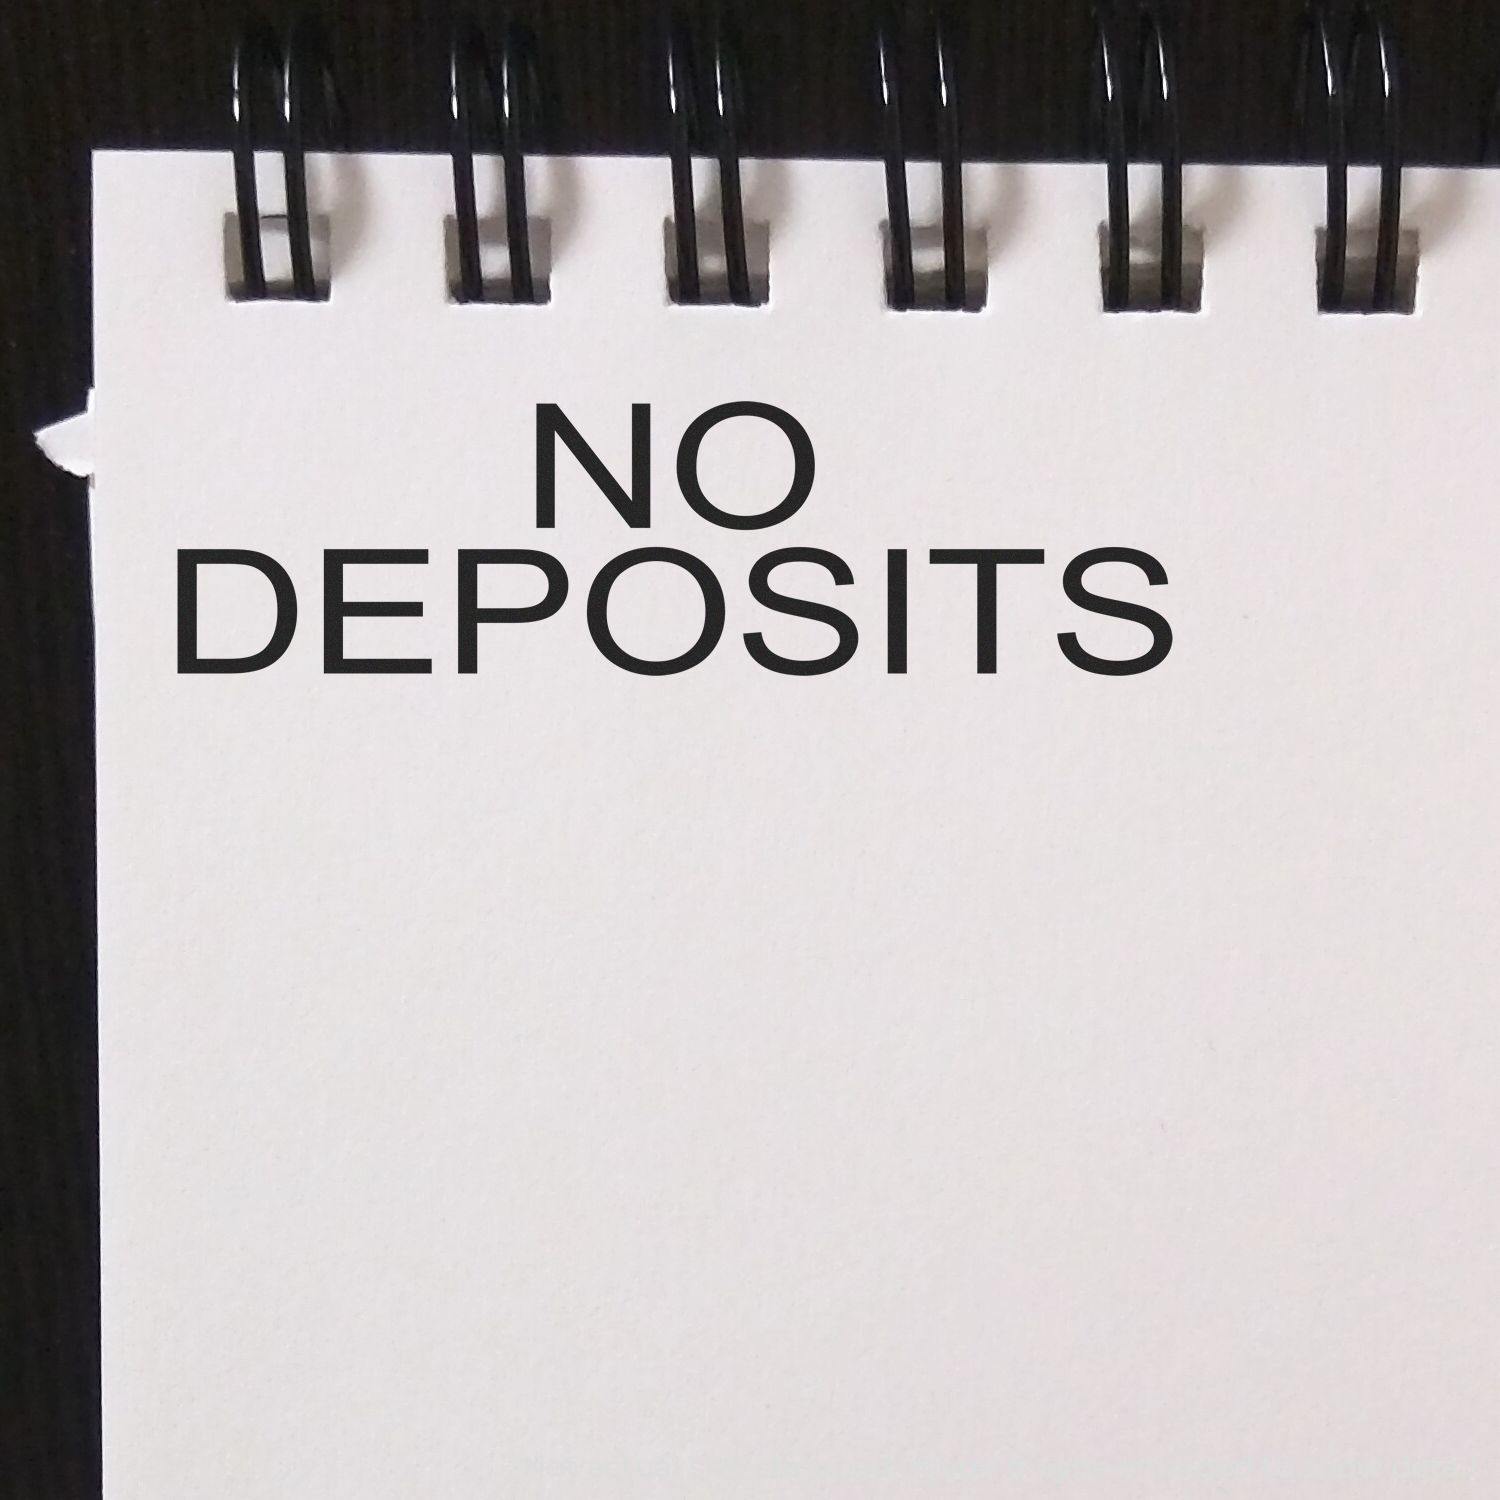 A stock office rubber stamp with a stamped image showing how the text "NO DEPOSITS" in a large font is displayed after stamping.